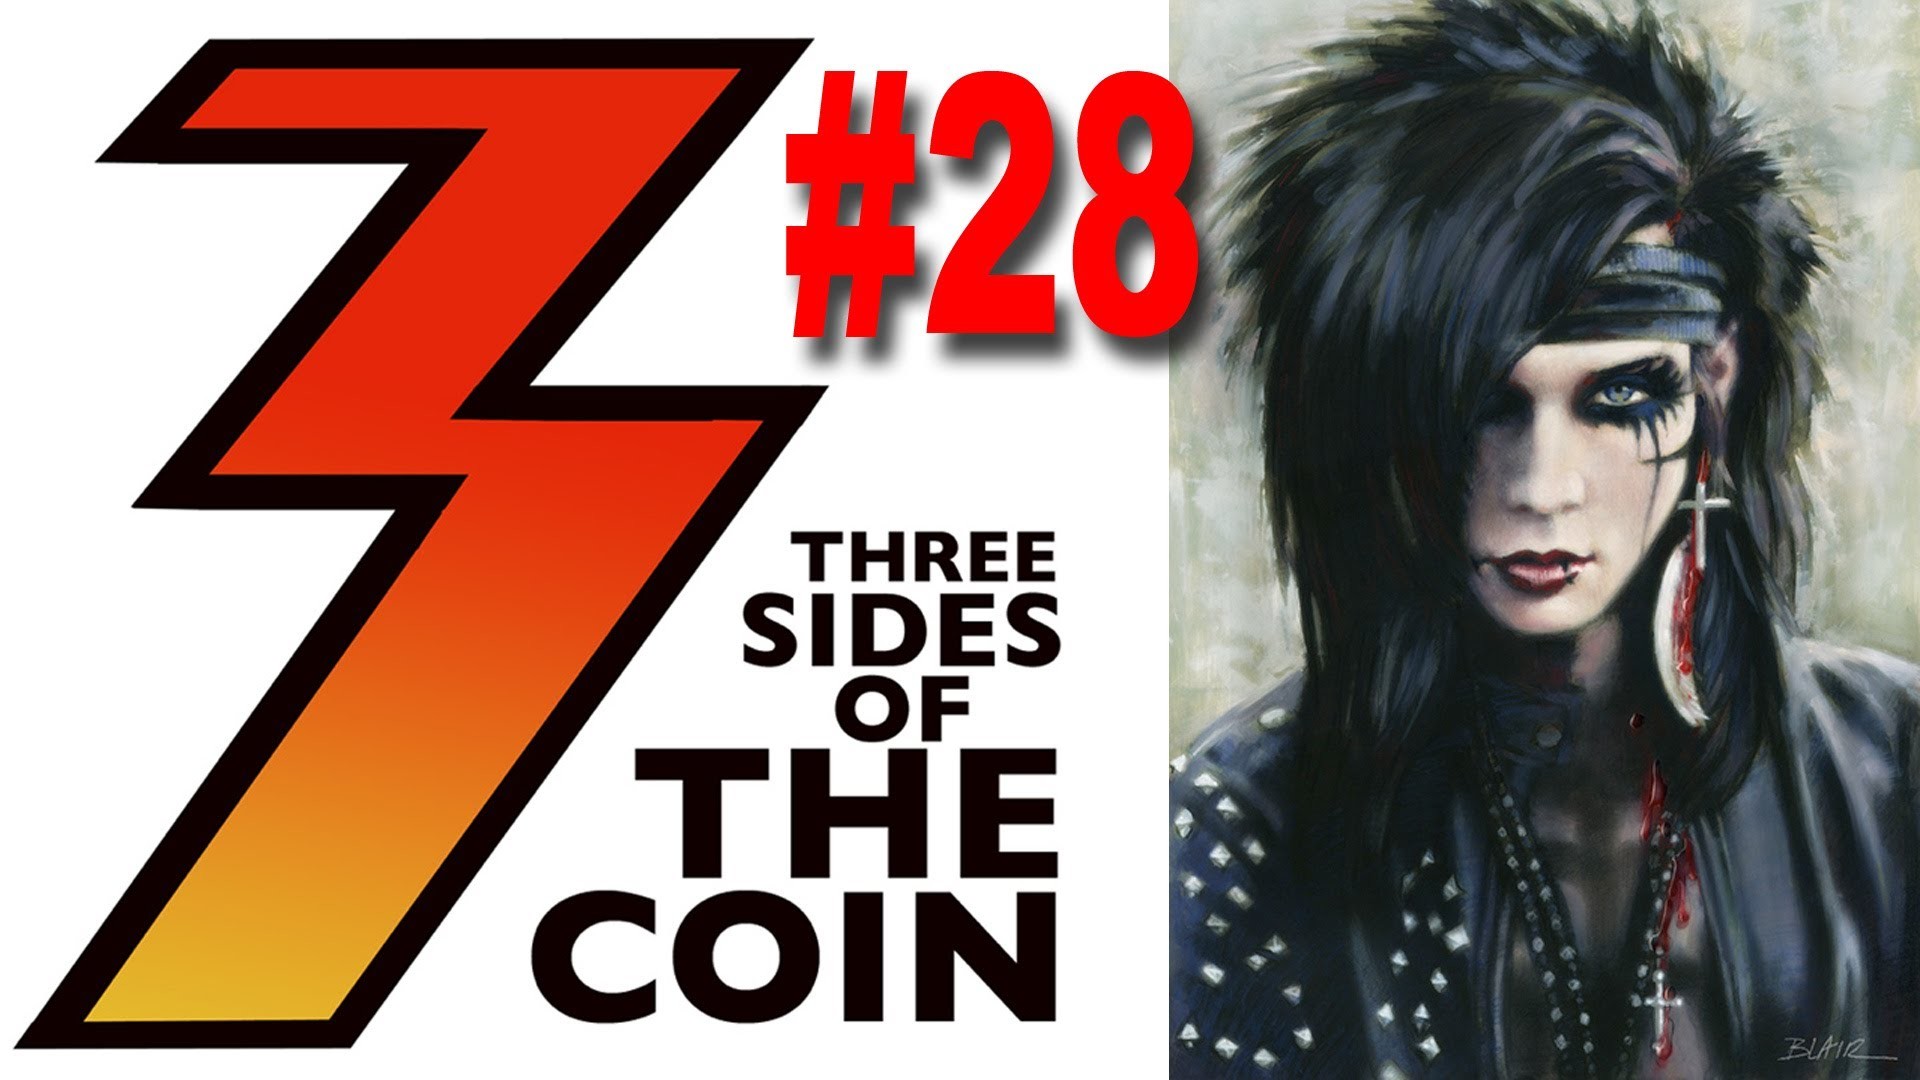 1920x1080 Andy Biersack from Black Veil Brides Talks KISS with Three Sides Of The  Coin - YouTube